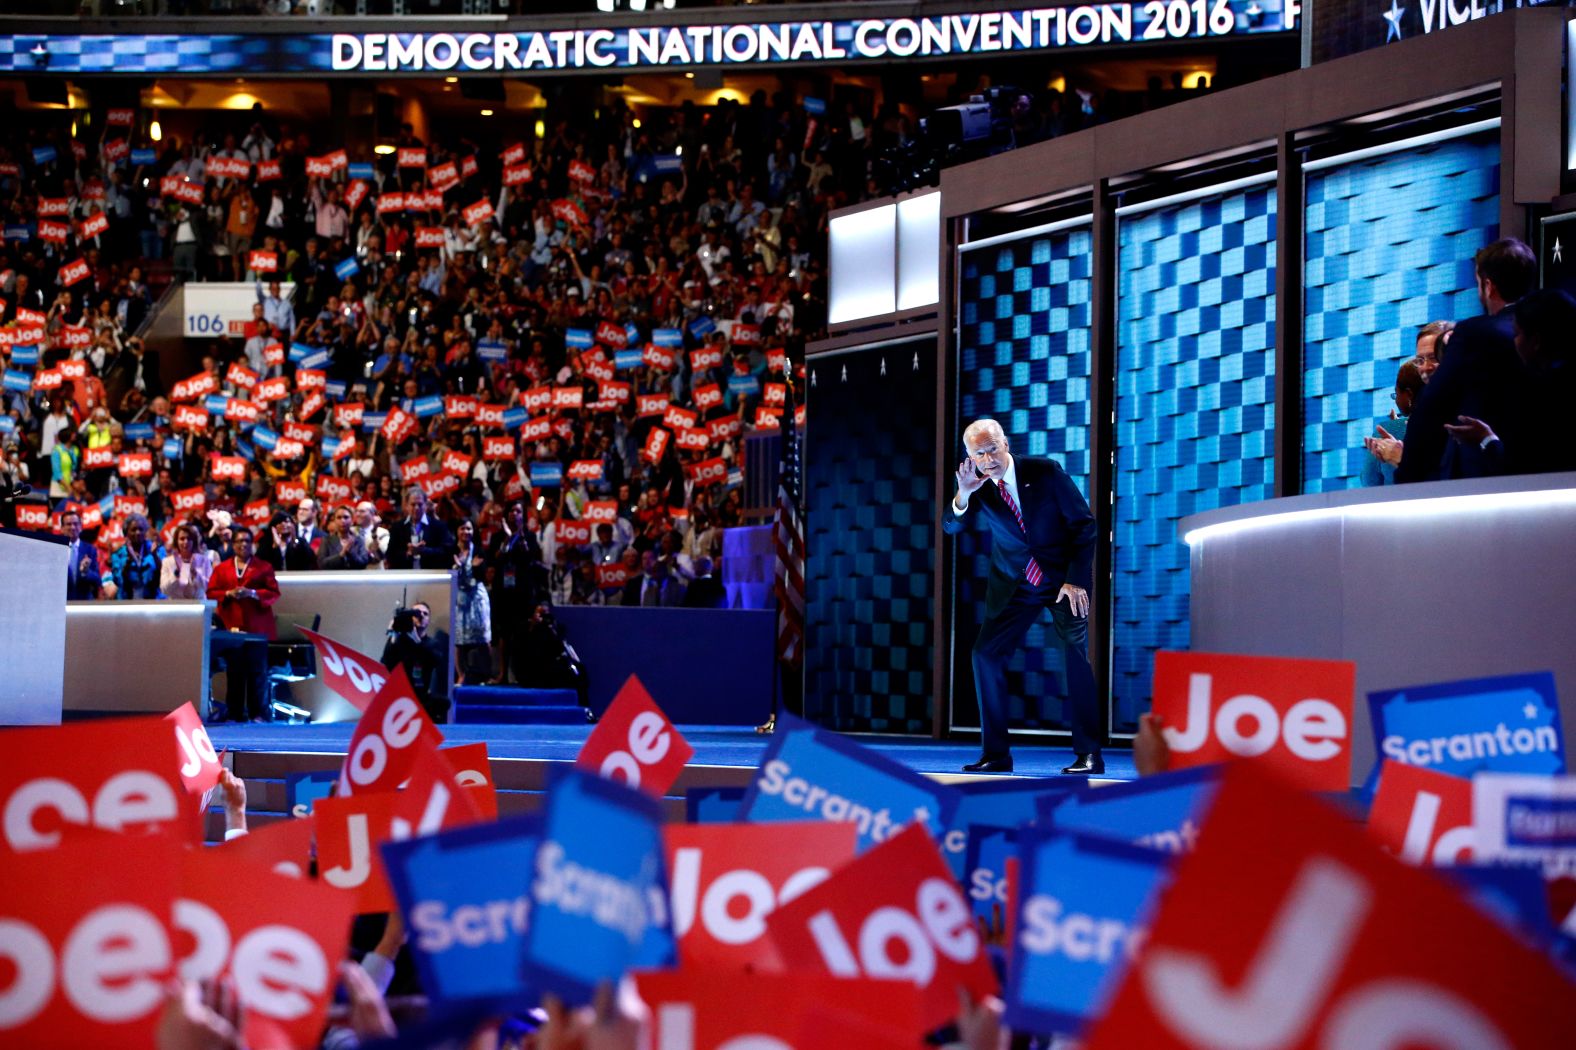 Biden waves to the crowd before speaking at the <a href="index.php?page=&url=http%3A%2F%2Fwww.cnn.com%2F2016%2F07%2F25%2Fpolitics%2Fgallery%2Fdemocratic-convention%2Findex.html" target="_blank">Democratic National Convention</a> in July 2016.